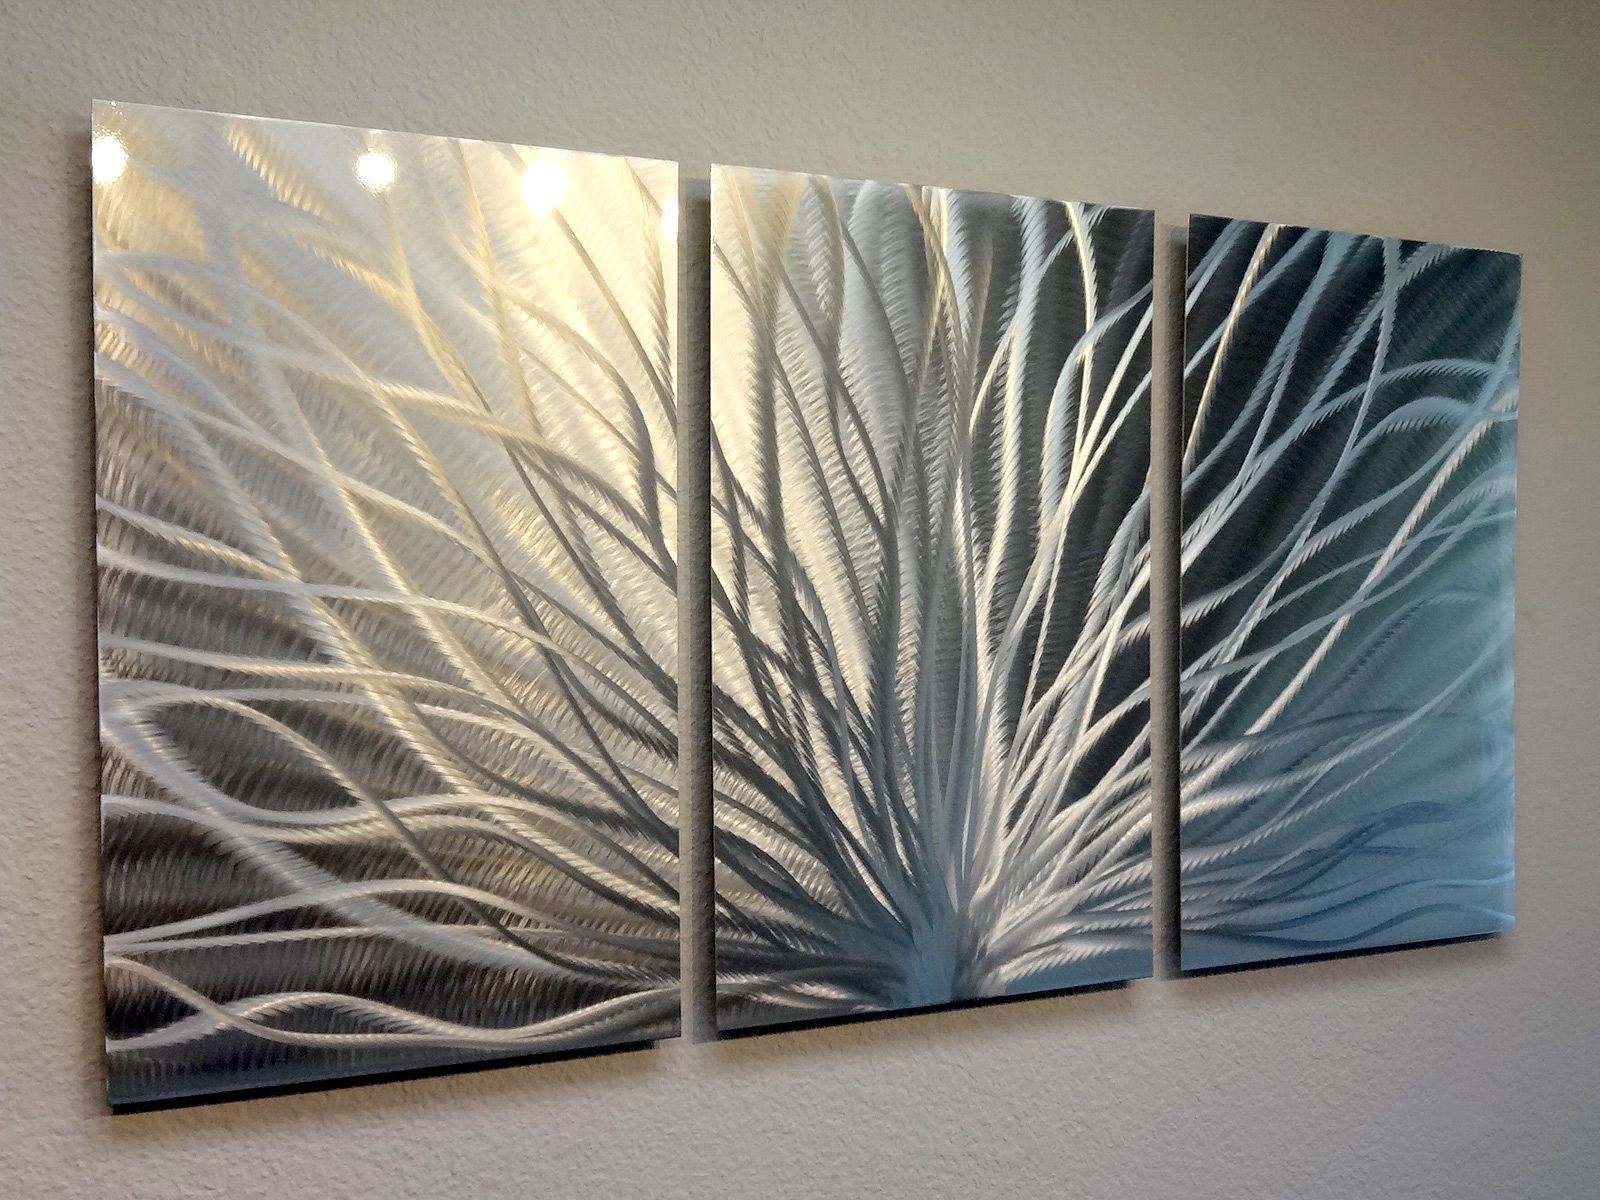 Radiance – 3 Panel Metal Wall Art Abstract Contemporary Modern Decor On Inside Limber Metal Wall Art (View 11 of 15)